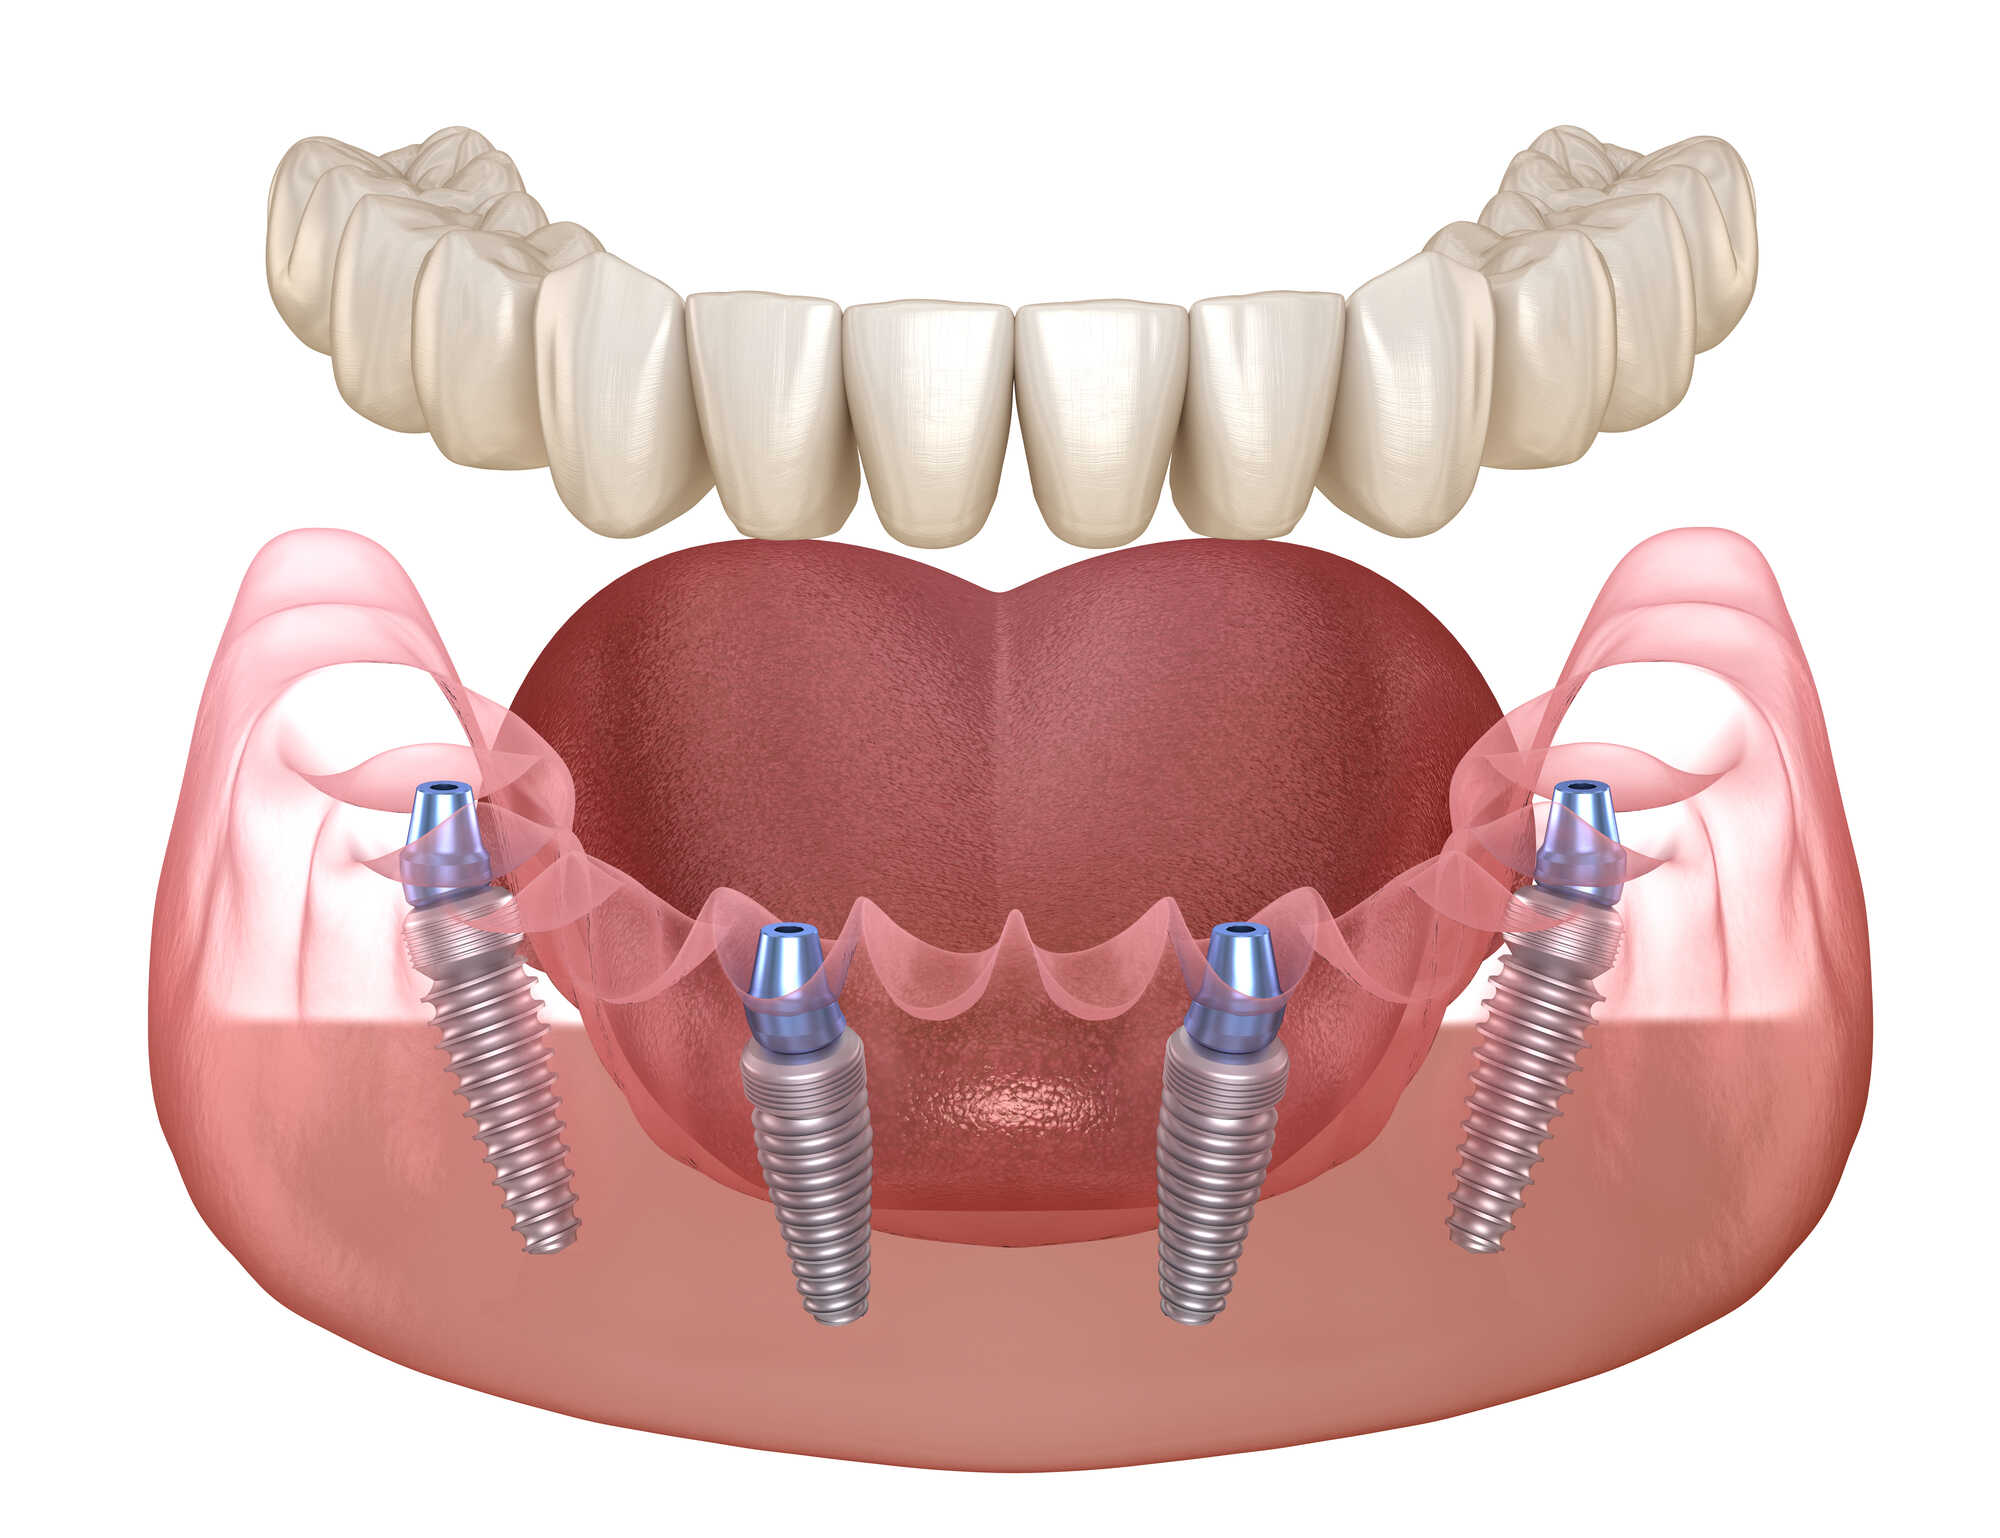 mandibular-prosthesis-all-on-4-system-supported-by-implants_optimized.-medically-accurate-3d-illustration-of-human-teeth-and-dentures-concept